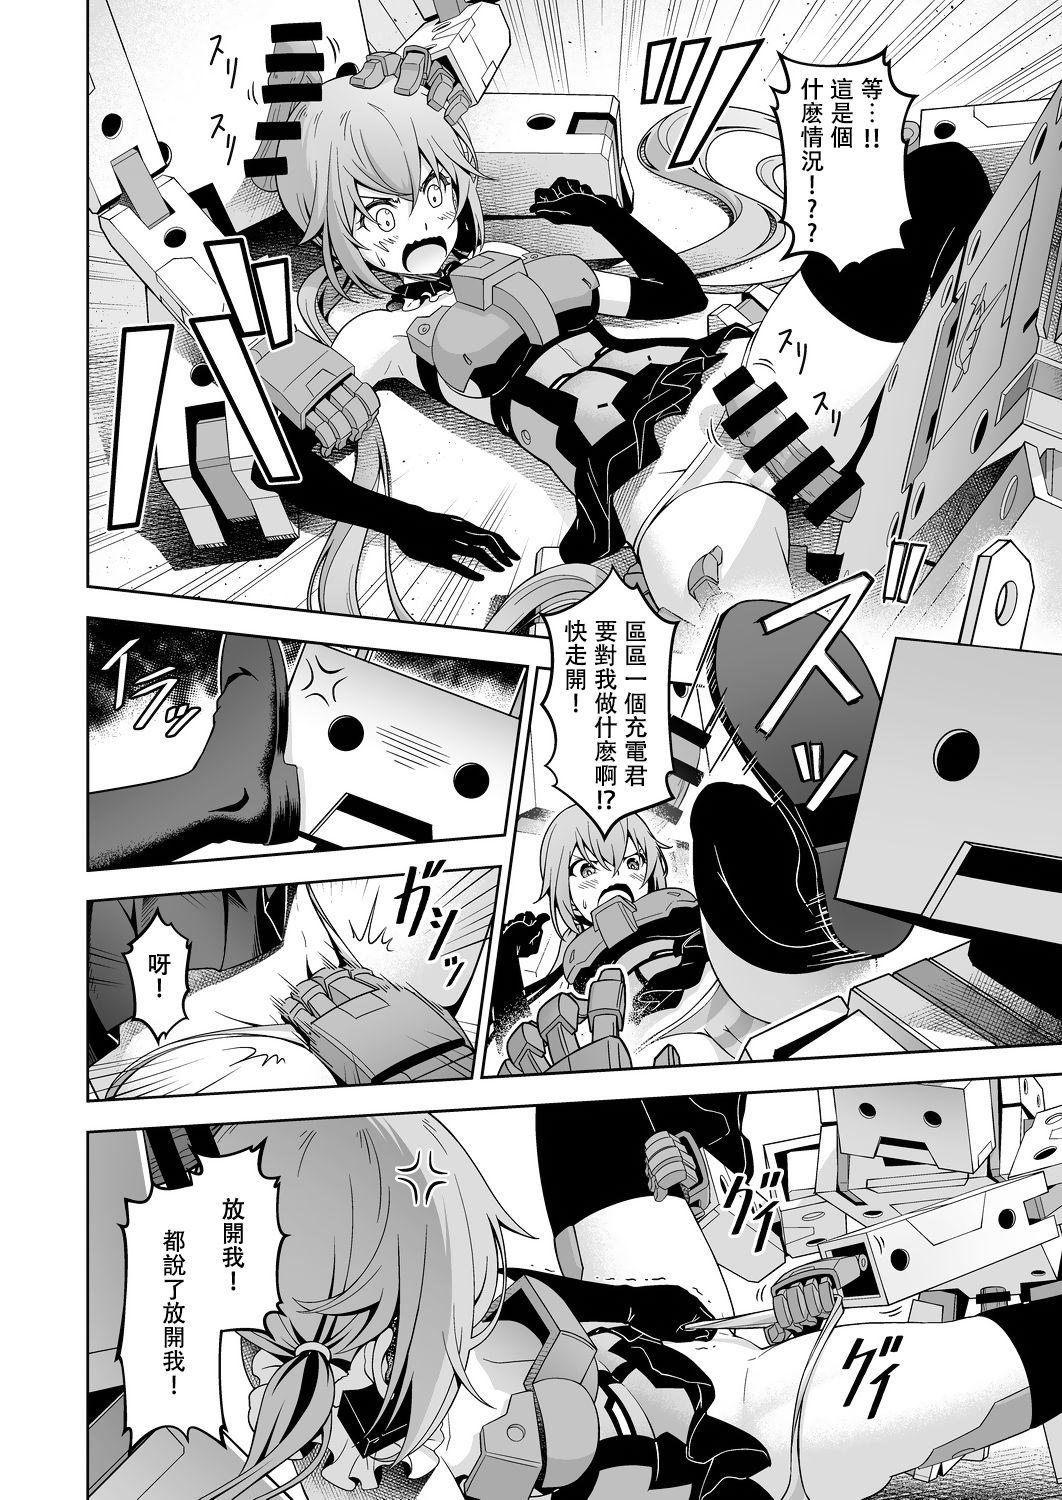 Leche Styko, Juuden Sareru! - Frame arms girl Eating Pussy - Page 10